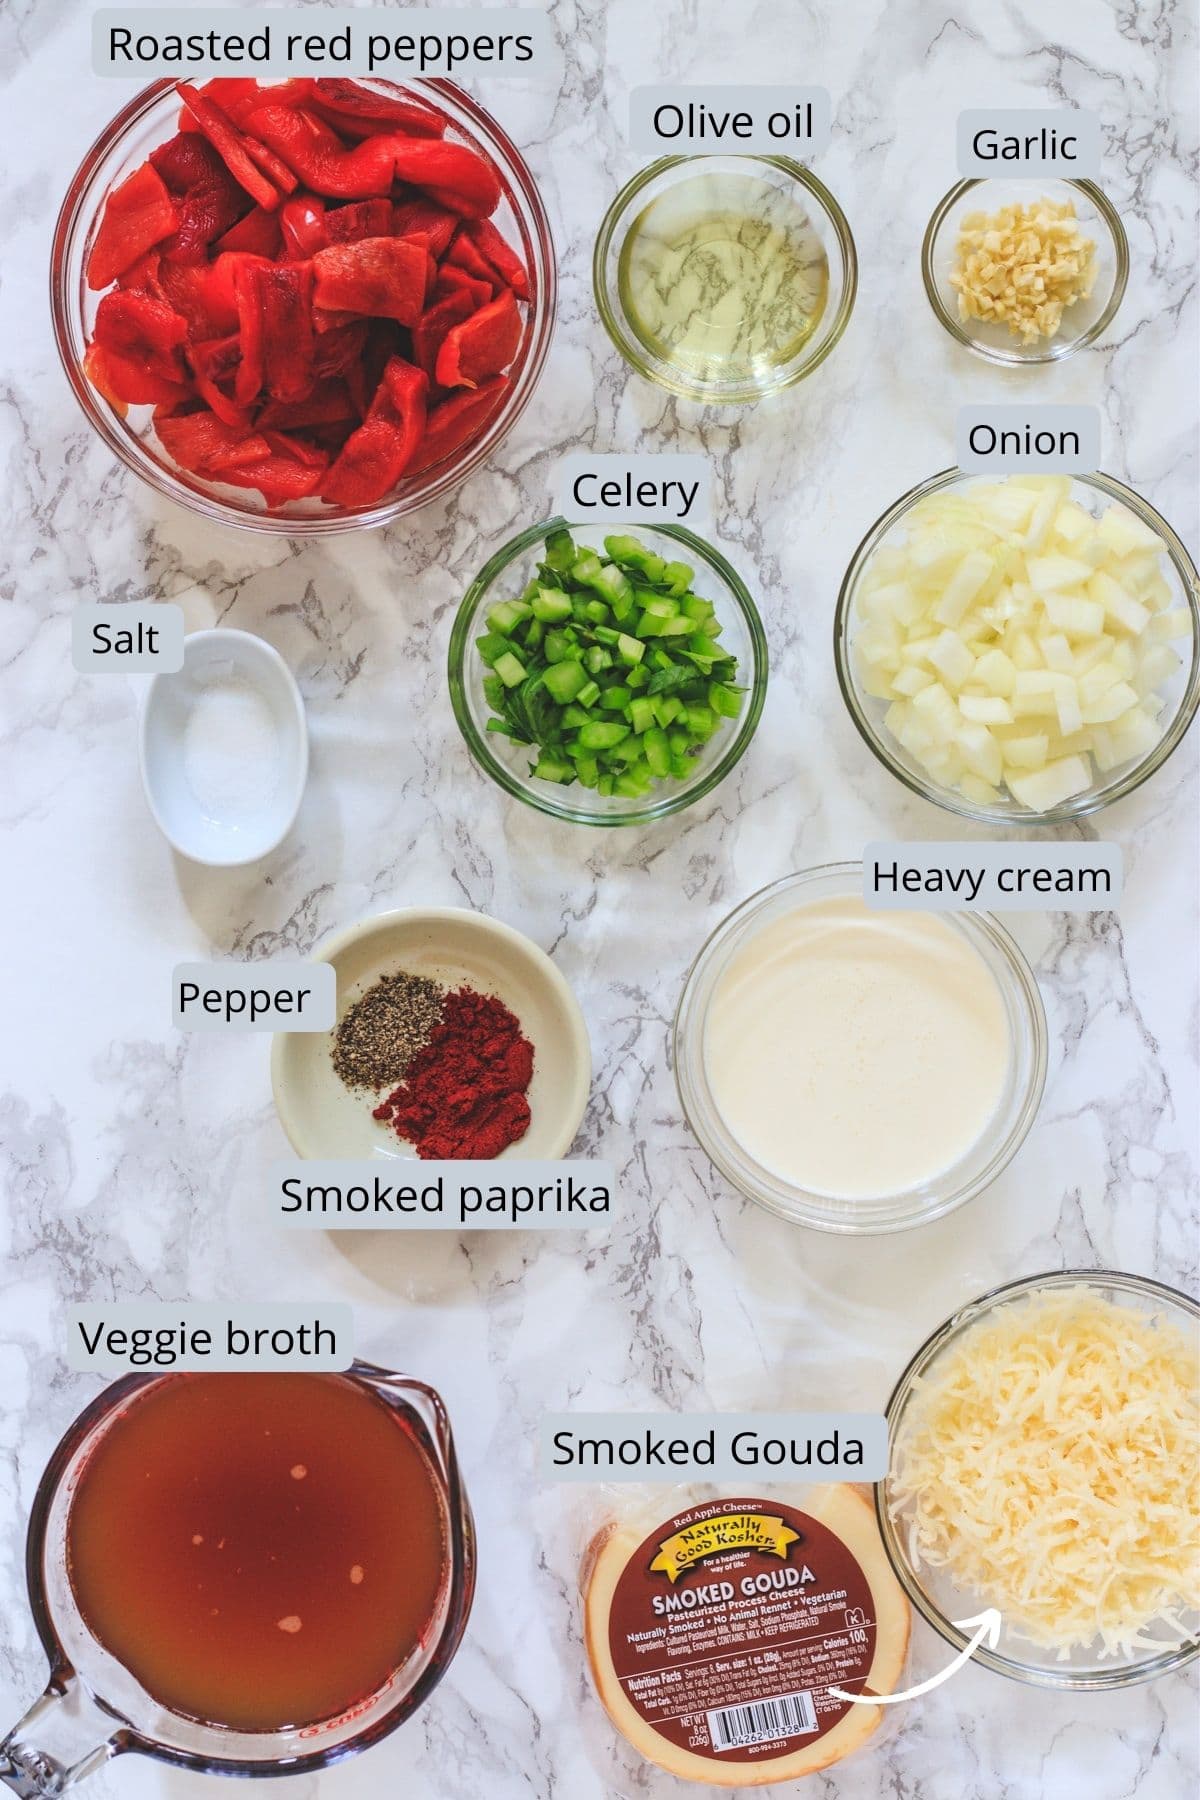 Ingredients used in roasted red pepper soup includes roasted peppers, onion, garlic, celery, salt, pepper, paprika, vegetable stock, cream and gouda.